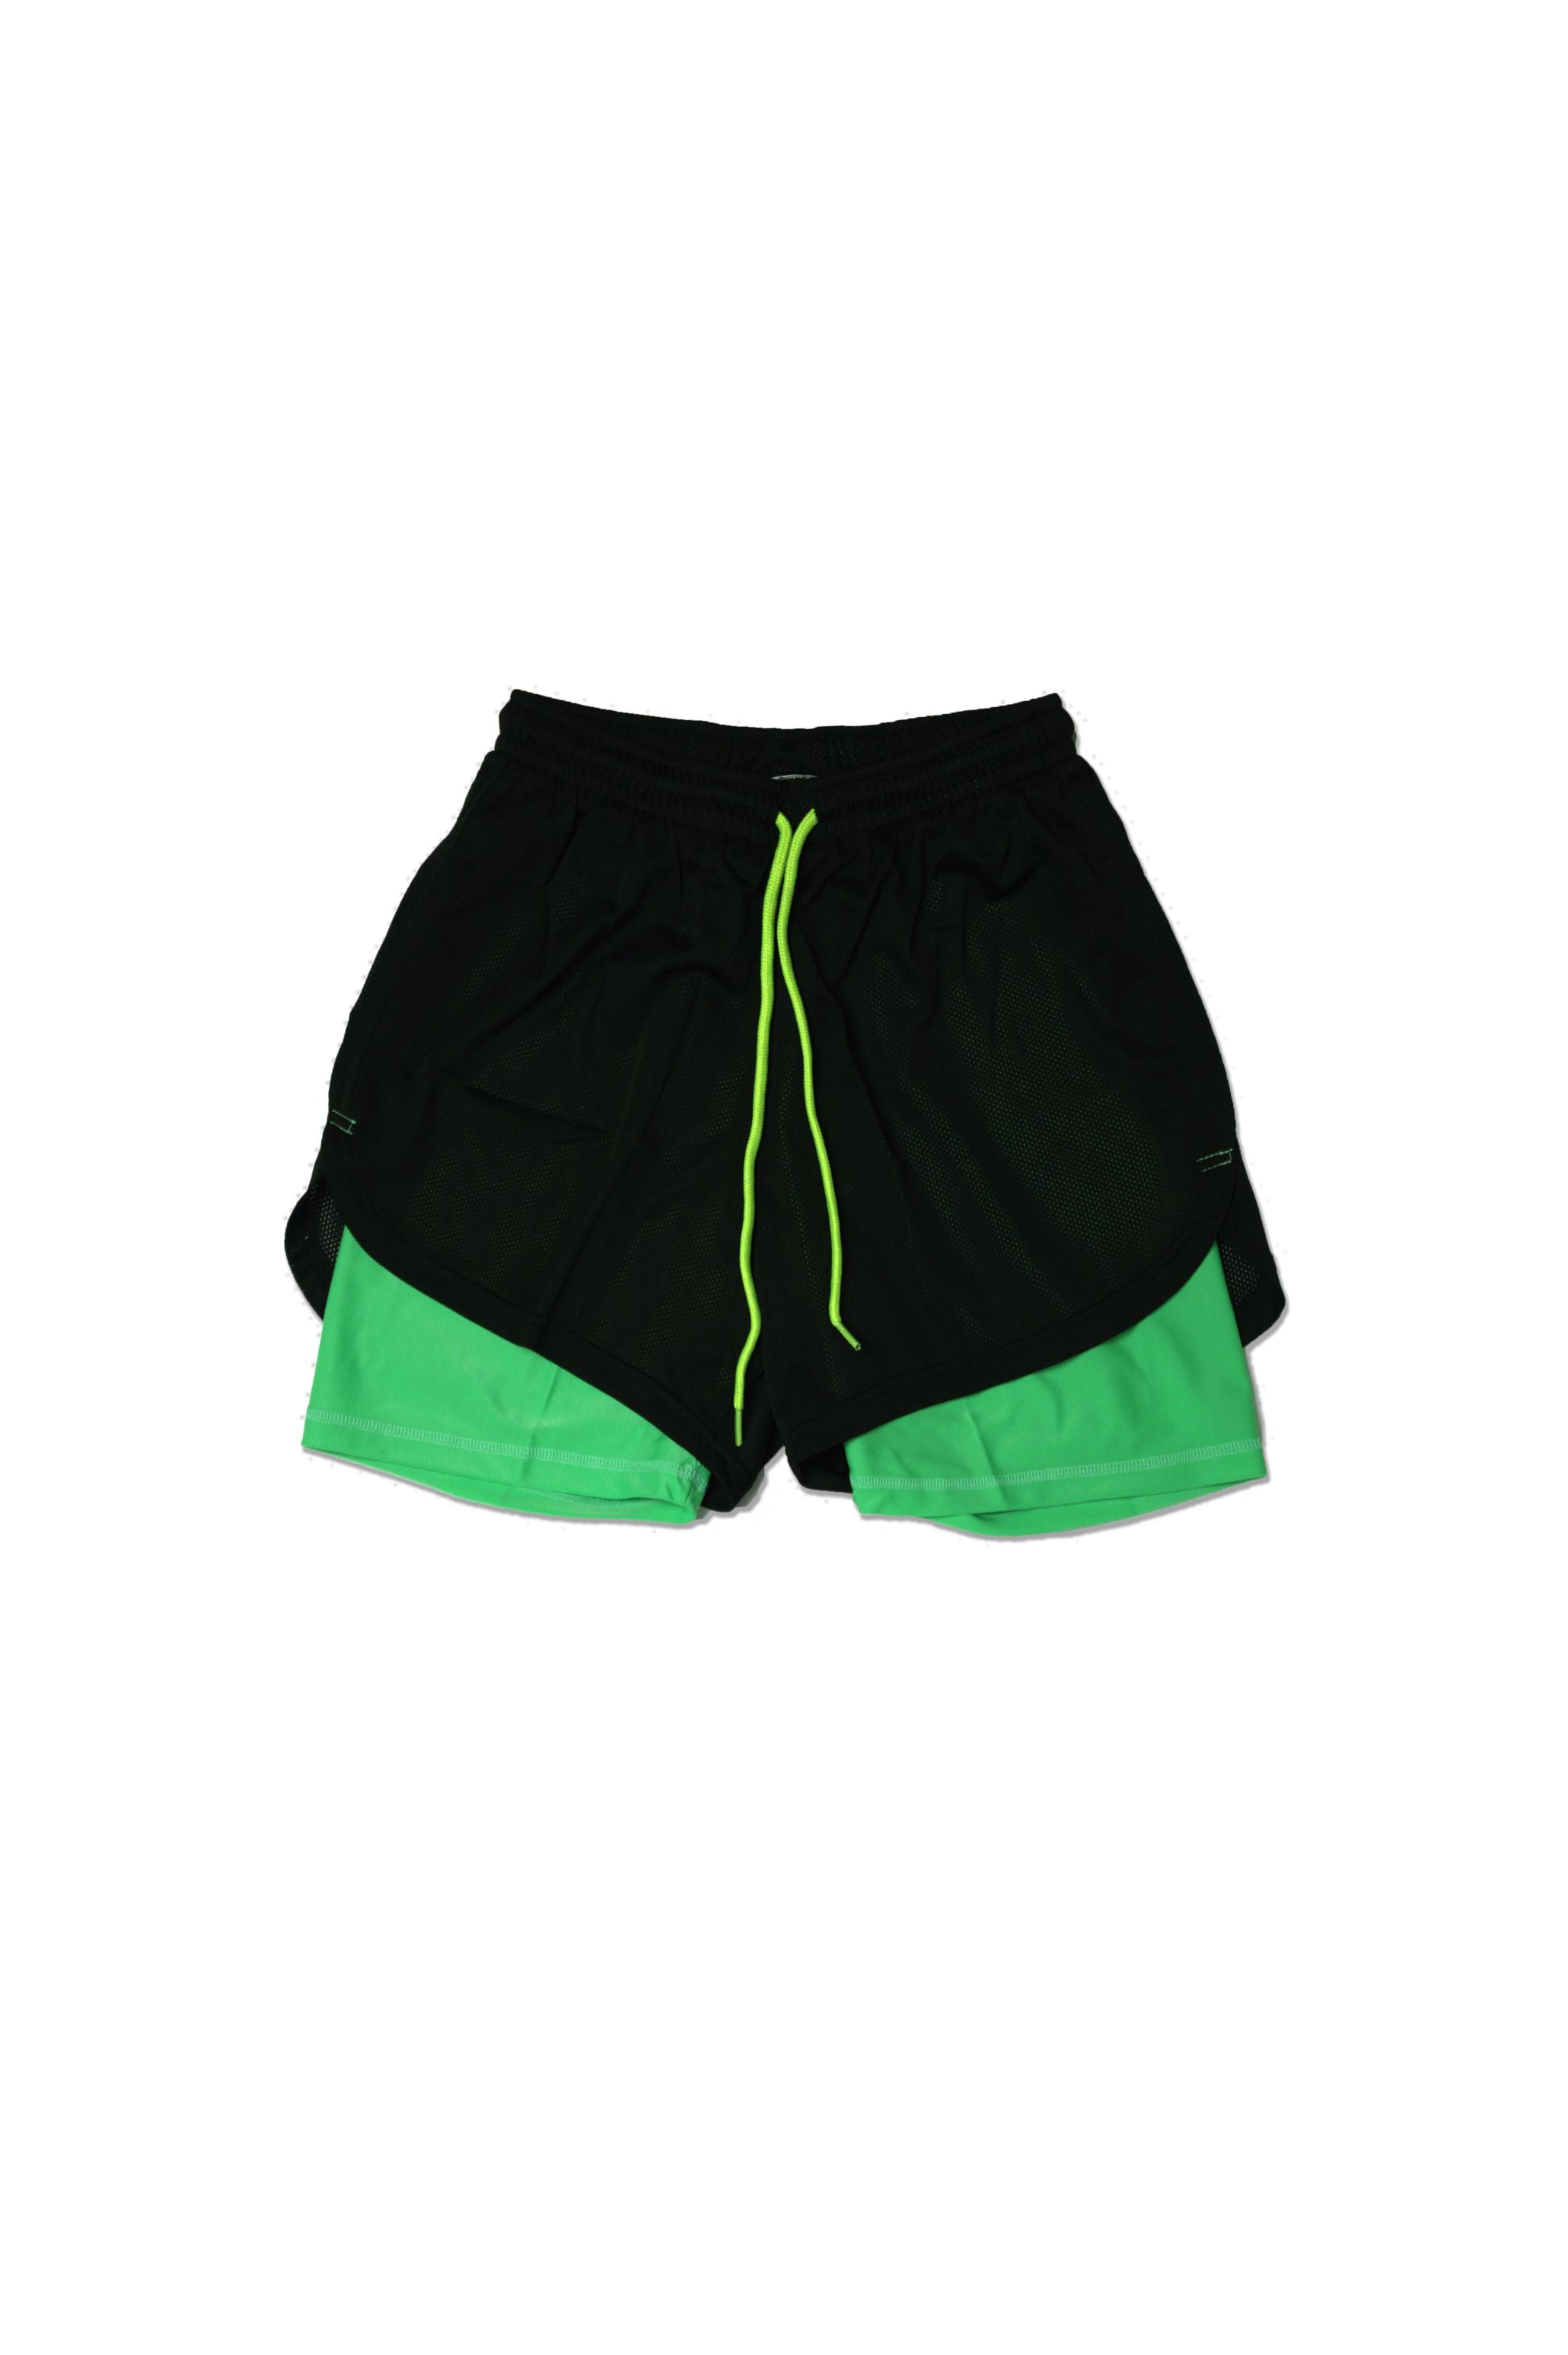 WOMEN FITNESS SHORTS BLACK AND GREEN